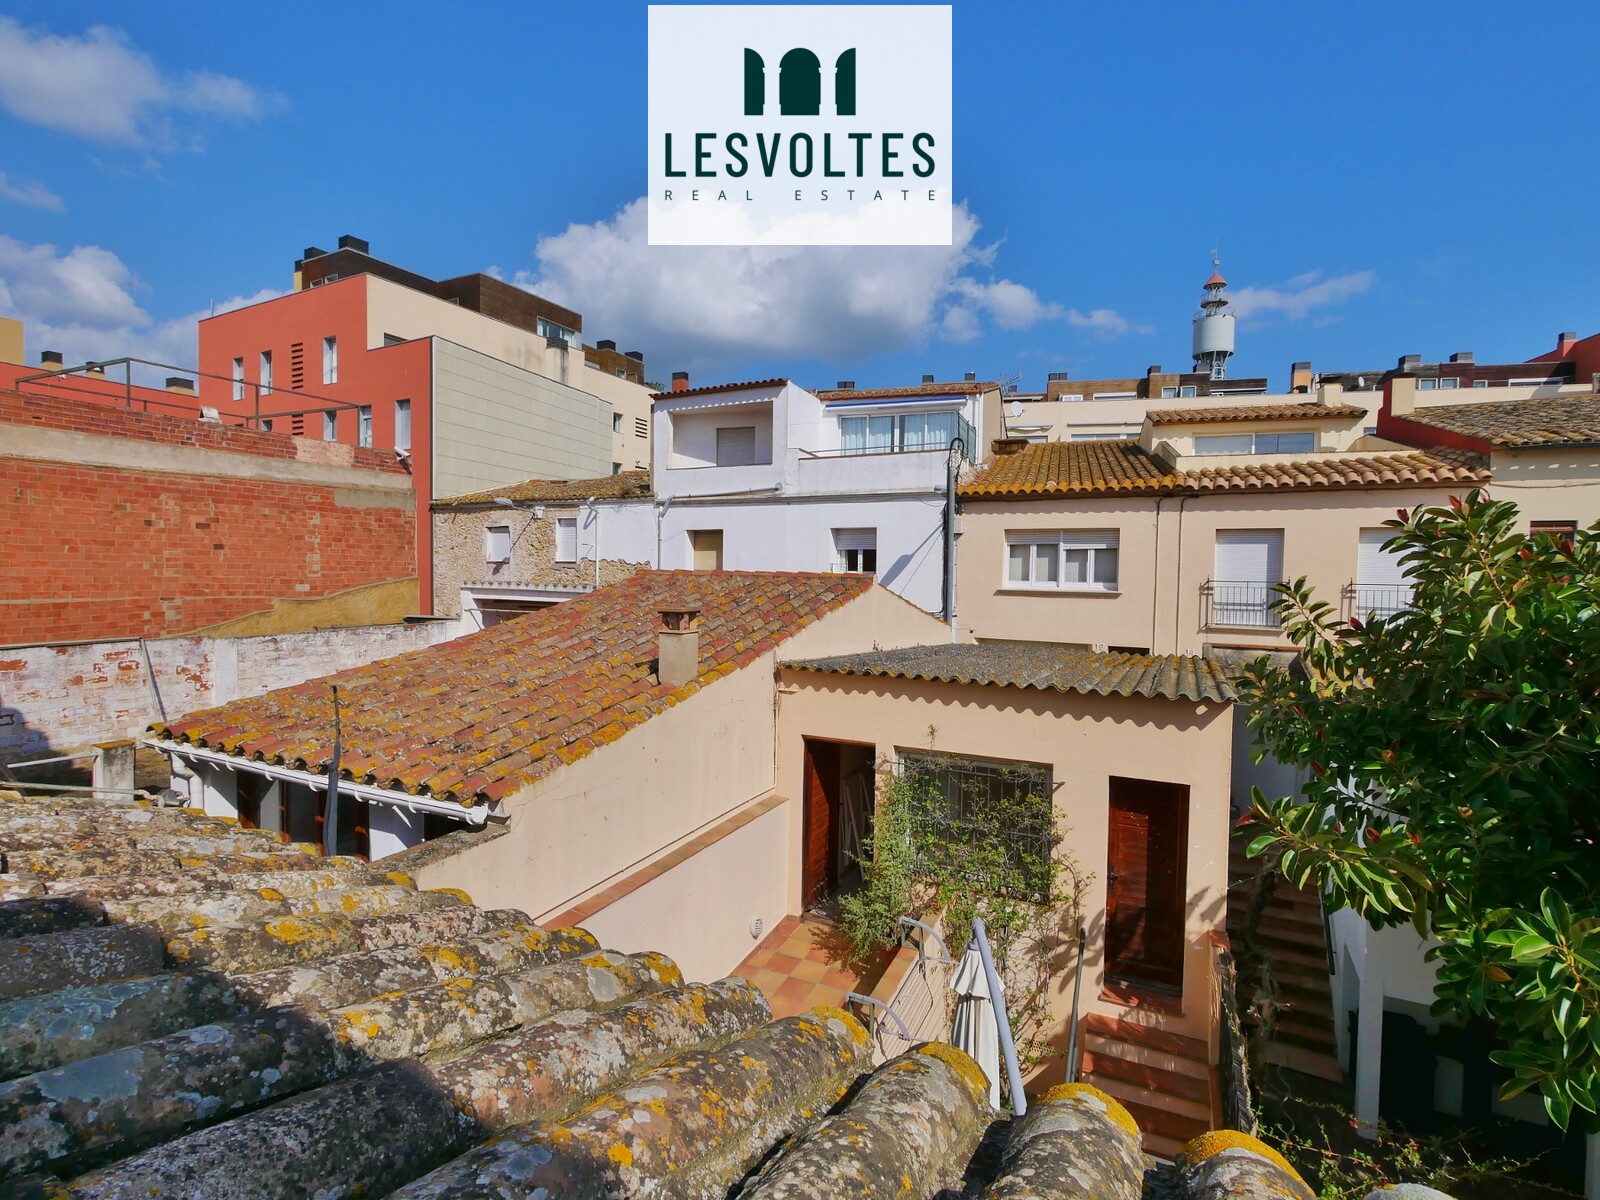 3 BEDROOM HOUSE WITH GARAGE IN THE CENTER OF PALAFRUGELL